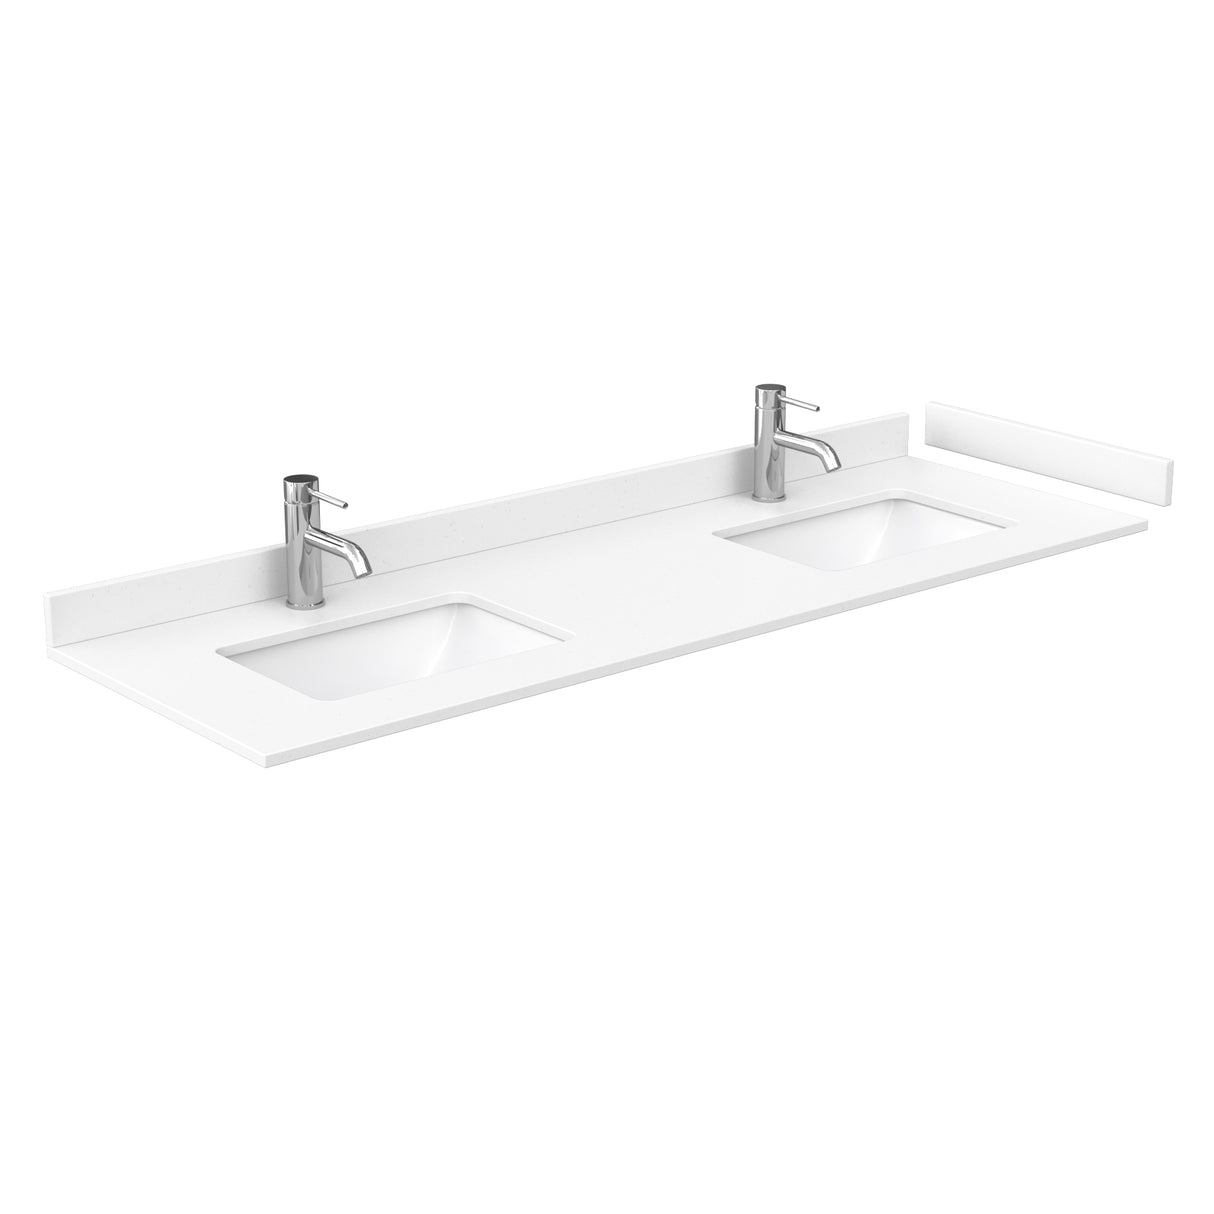 Beckett 66 Inch Double Bathroom Vanity in White White Cultured Marble Countertop Undermount Square Sinks No Mirror